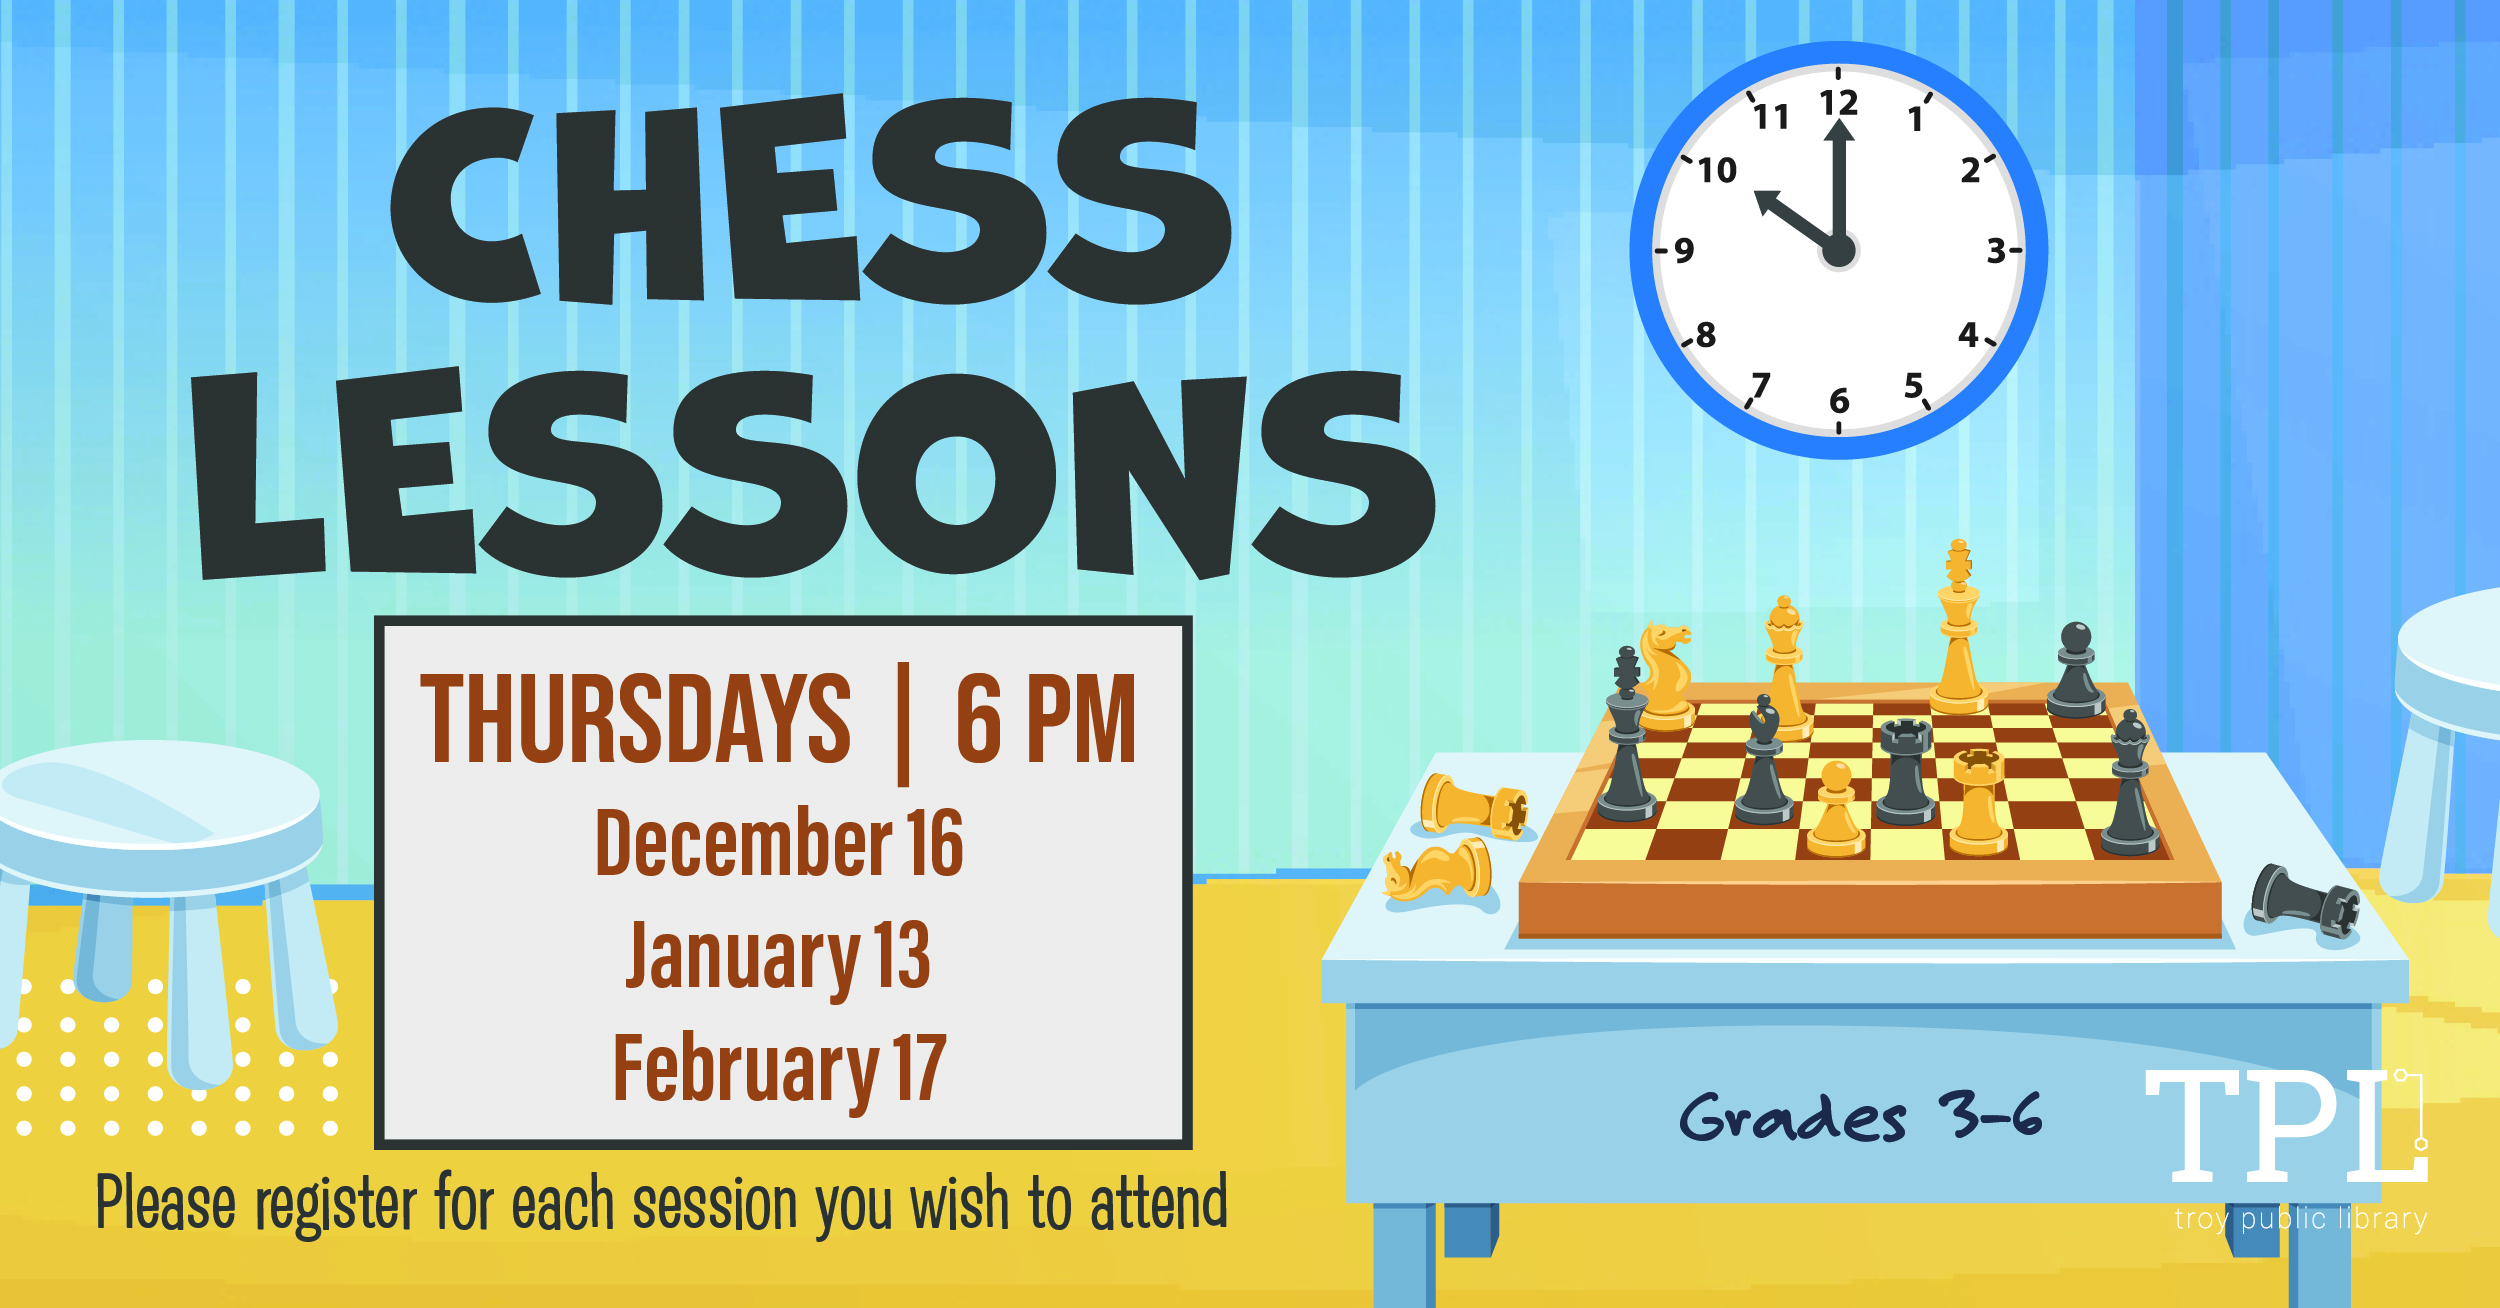 Chess Lessons Grades 3 to 6 Thursdays Dec. 16, Jan. 13, Feb. 17 at 6pm. Register for each session you wish to attend. 